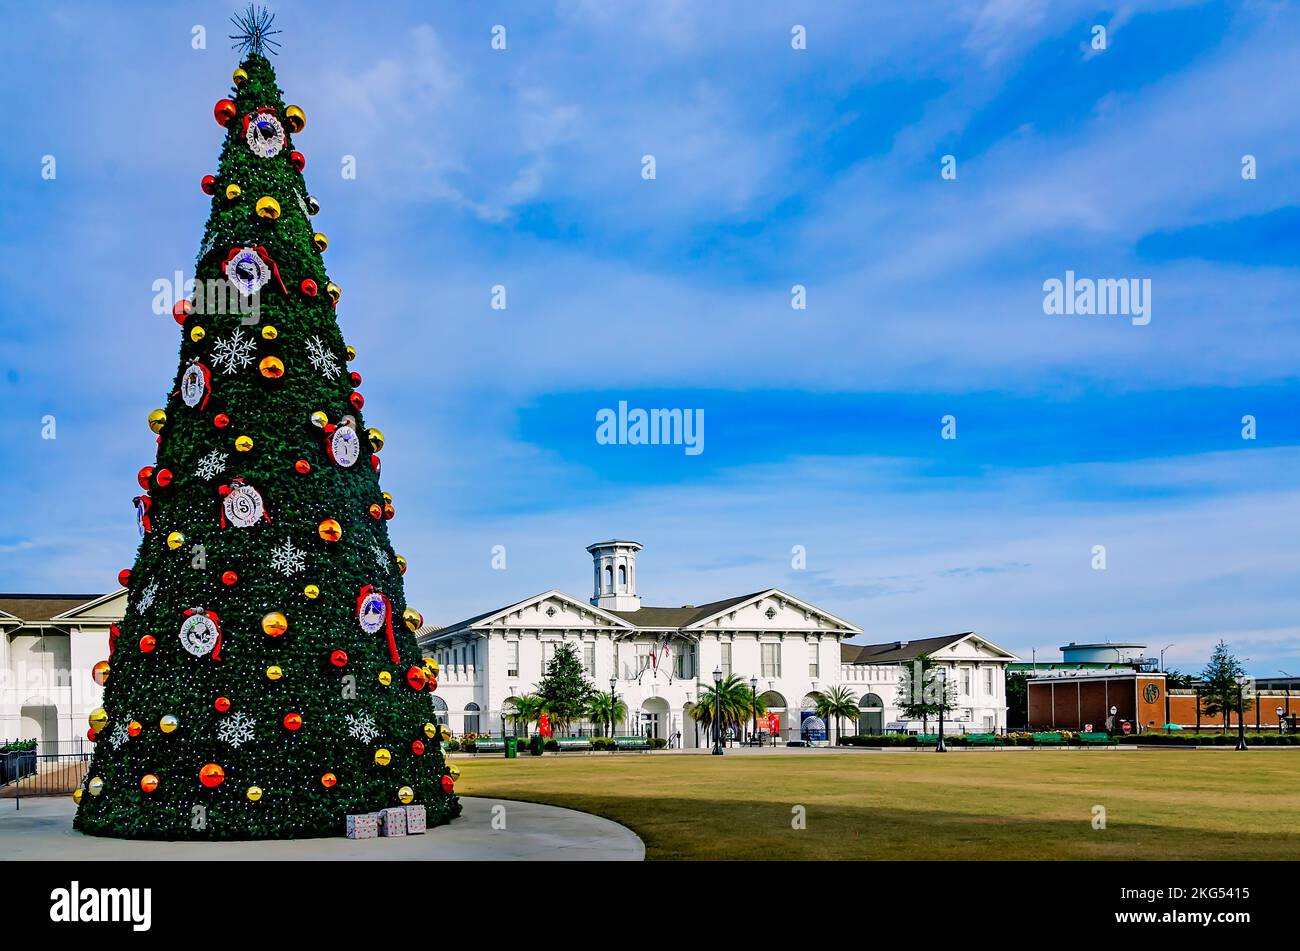 The city Christmas tree is displayed at Mardi Gras Park, Nov. 20, 2022, in Mobile, Alabama. In the background is the History Museum of Mobile. Stock Photo